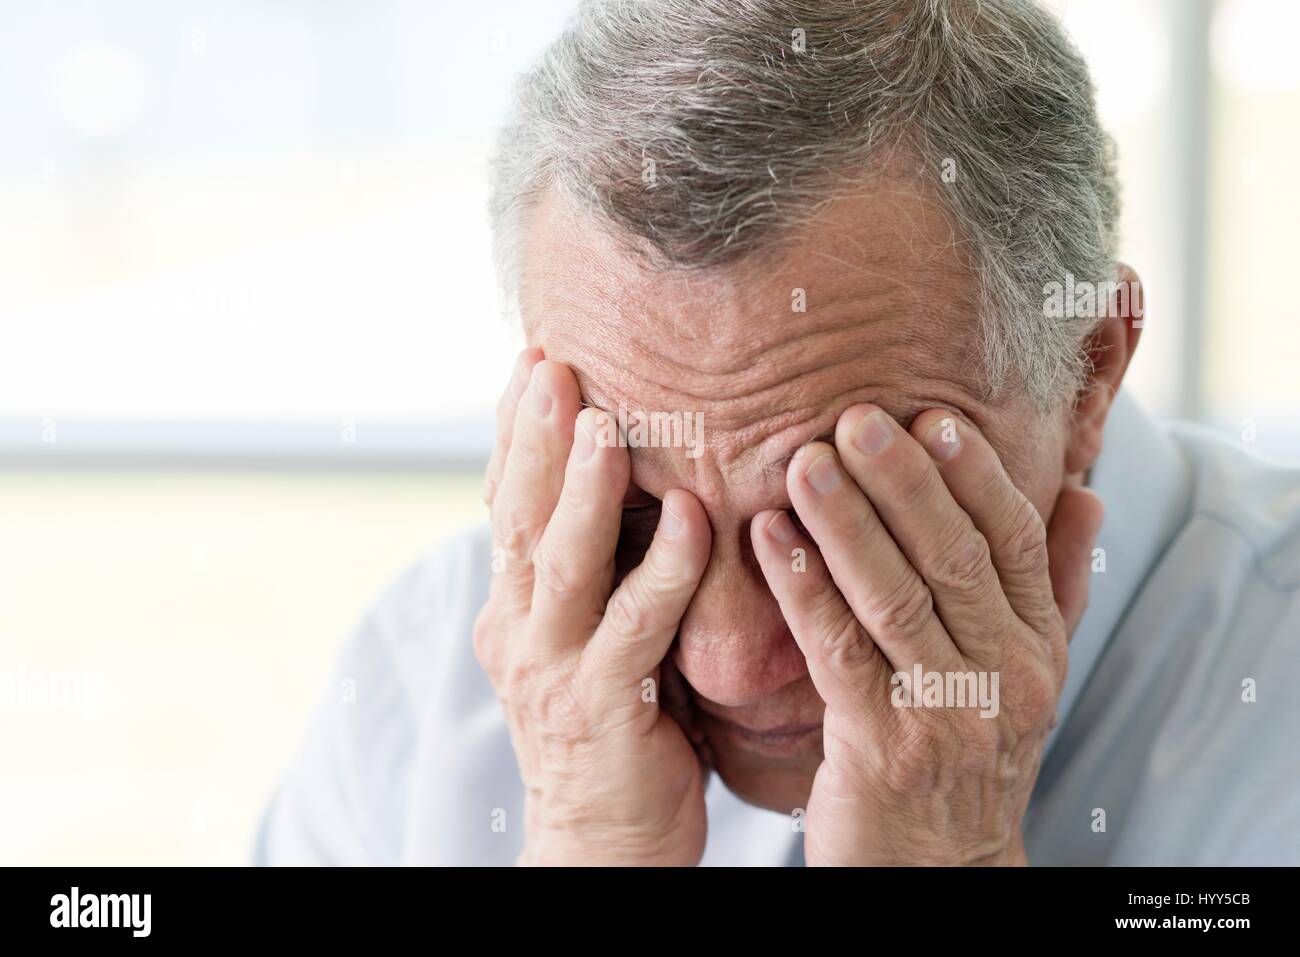 Senior man with hands covering face, close up. Stock Photo